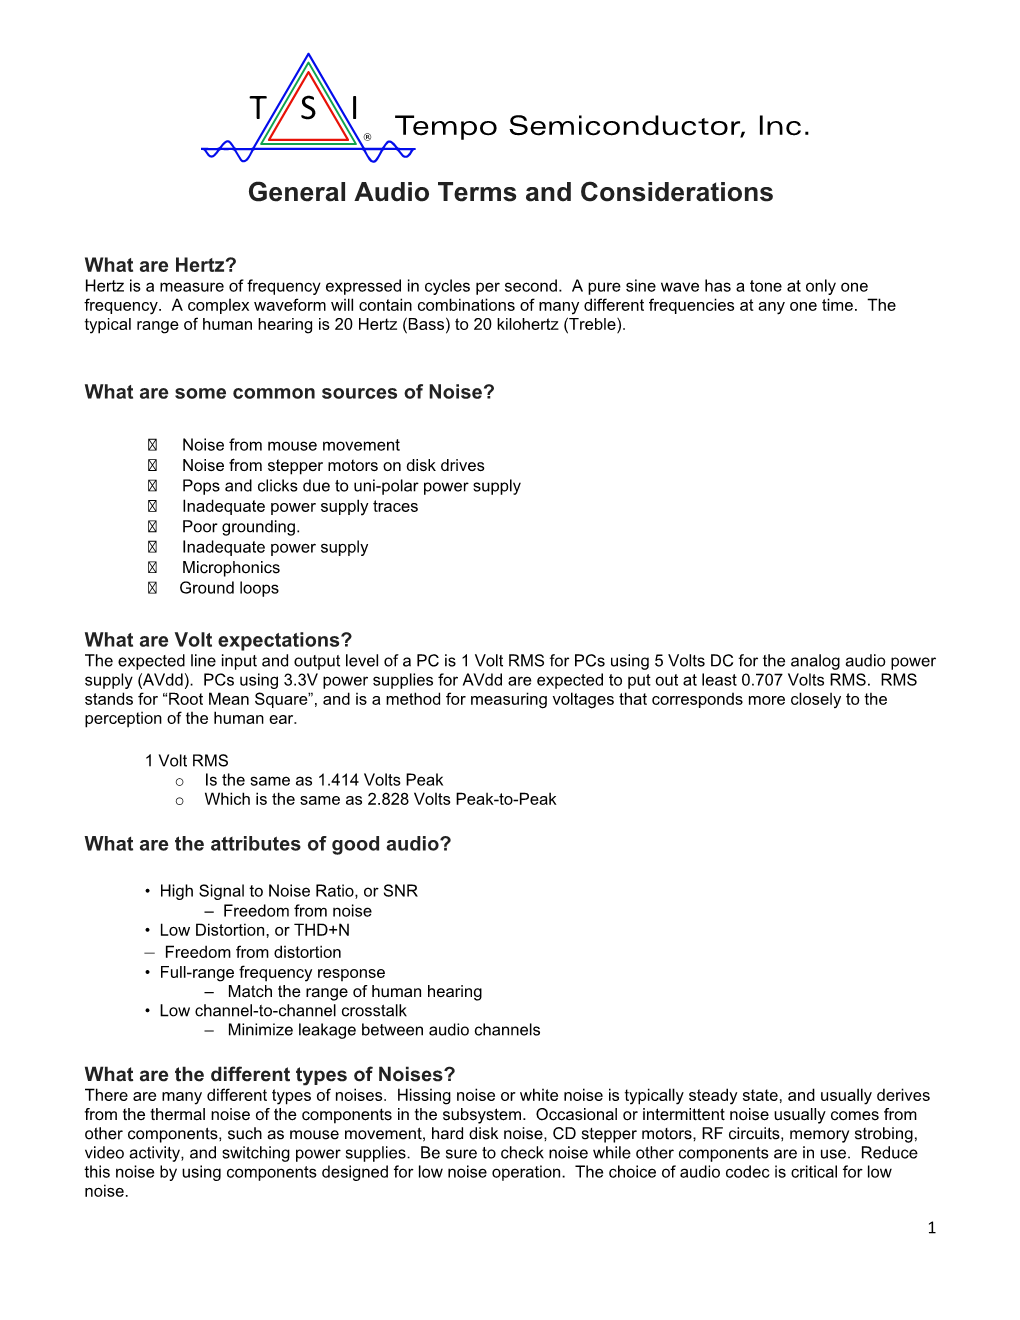 General Audio Terms and Considerations